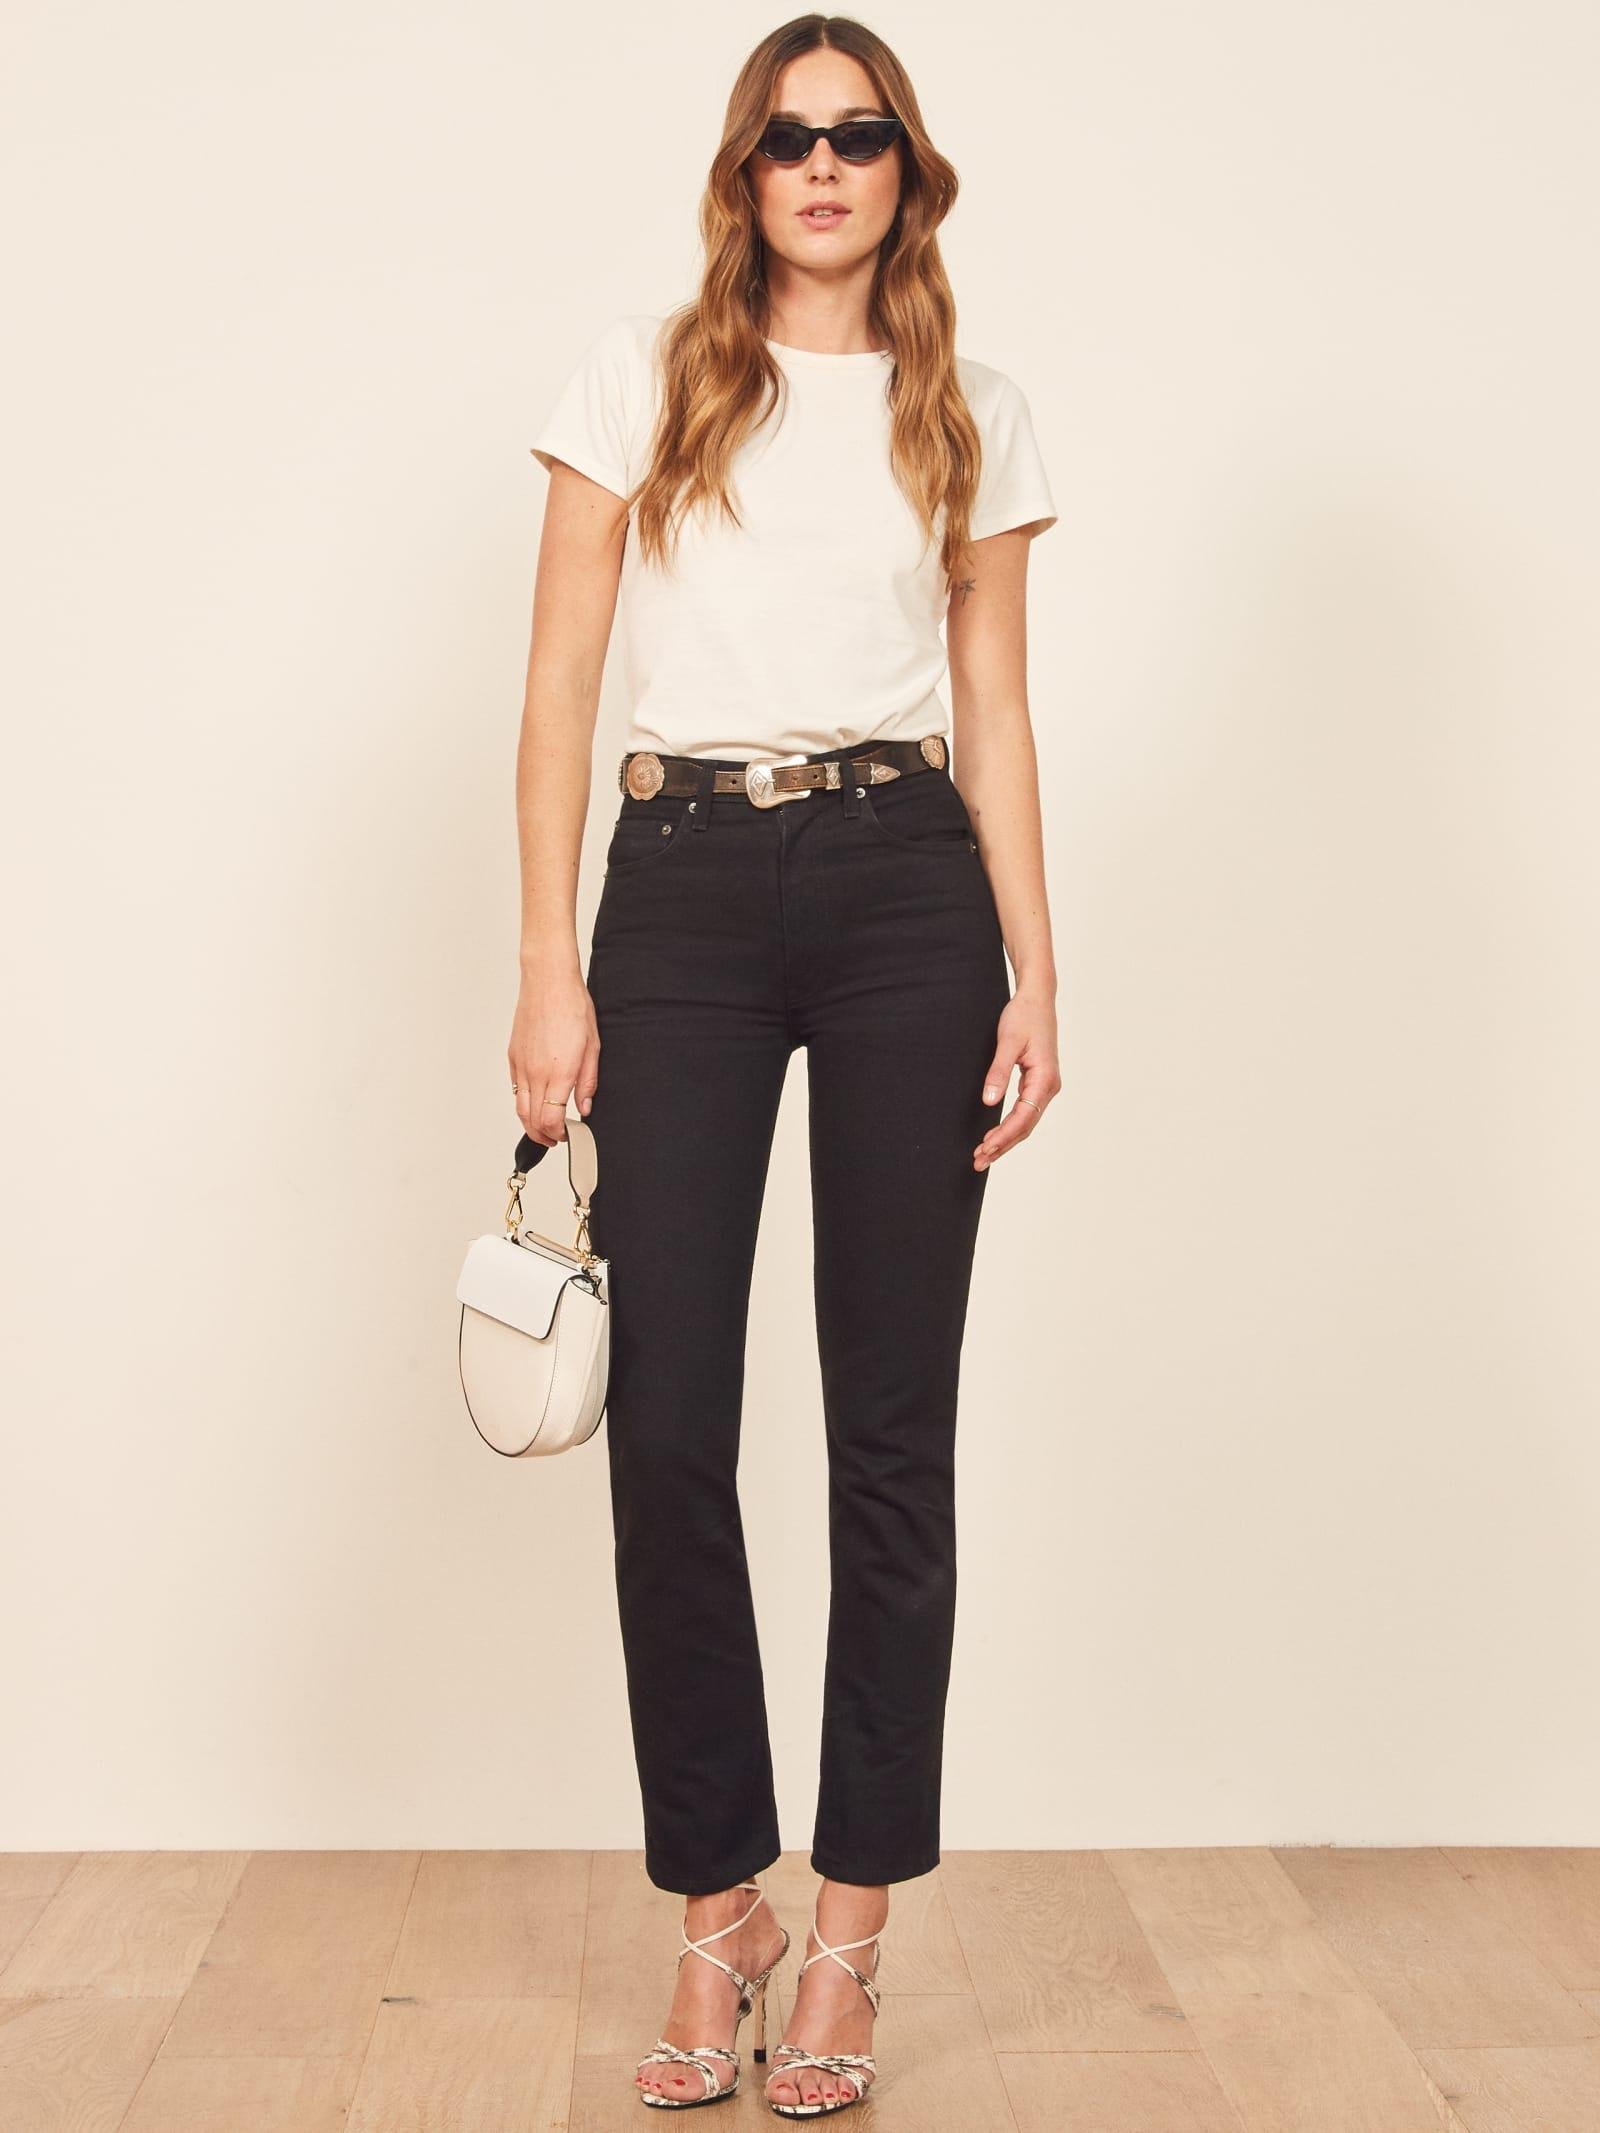 Reformation Stevie Ultra High Rise Jean in Black | Lyst